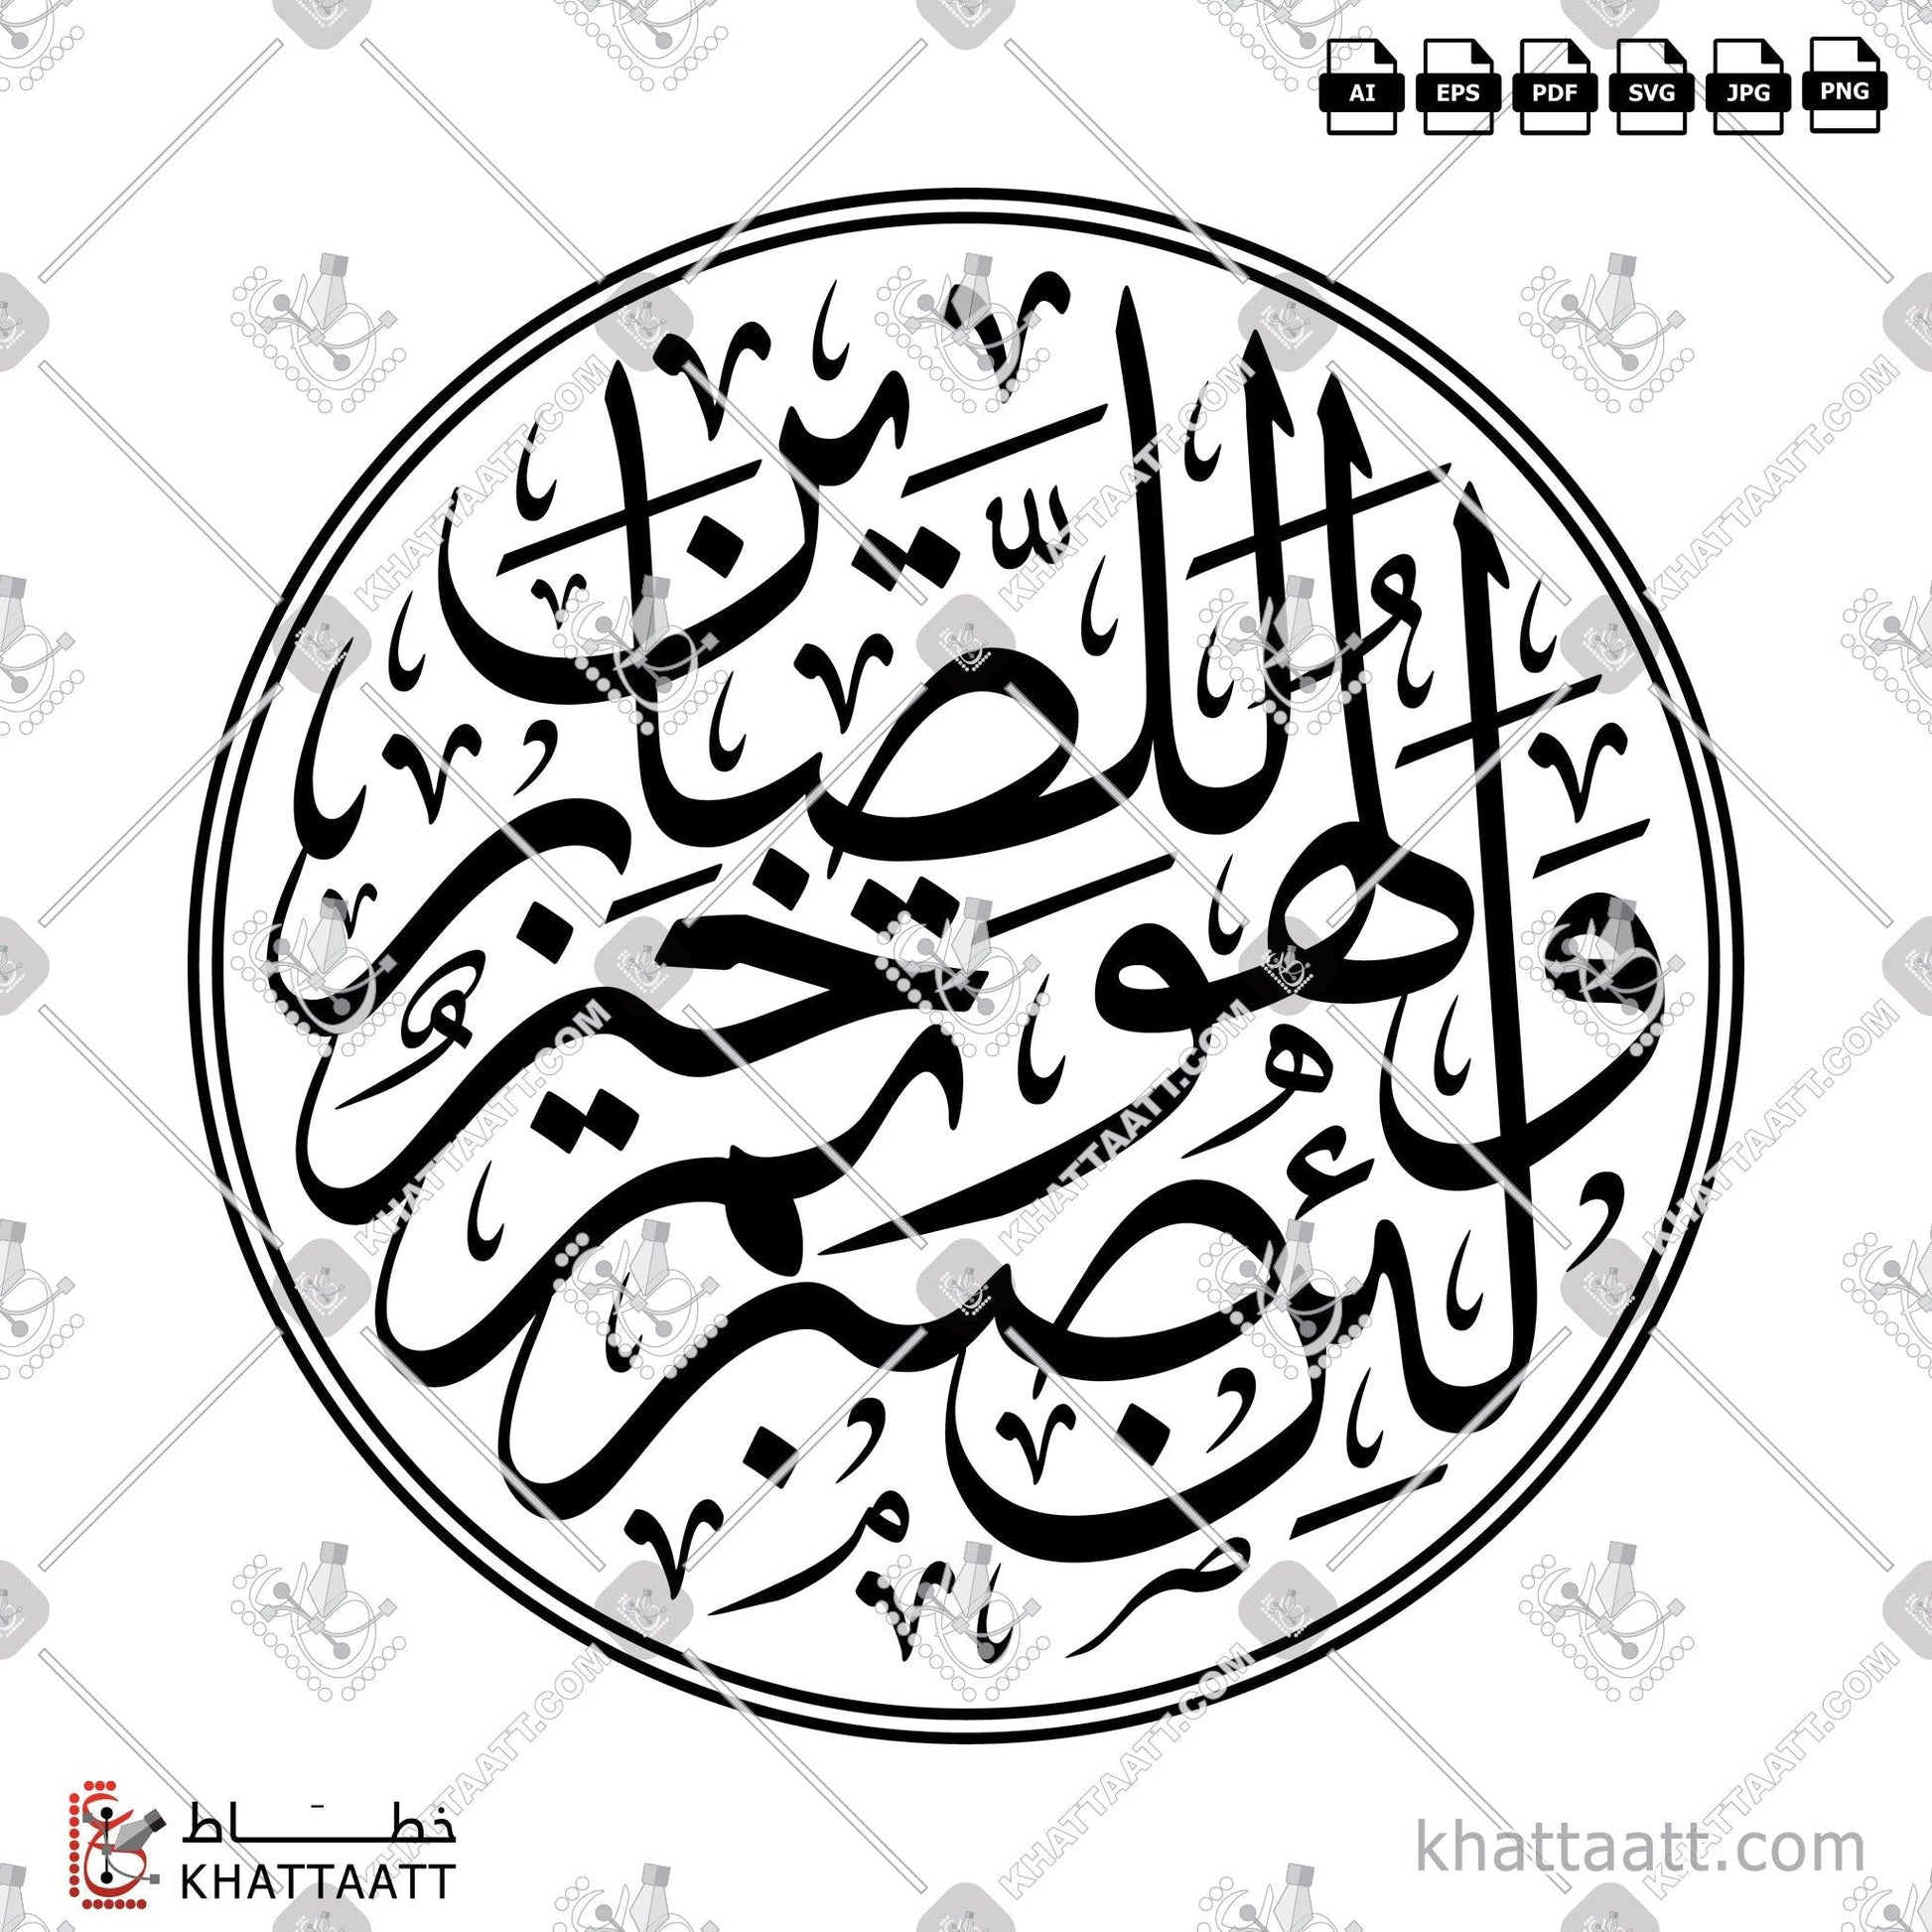 Download Arabic Calligraphy of ولئن صبرتم لهو خير للصابرين in Thuluth - خط الثلث in vector and .png